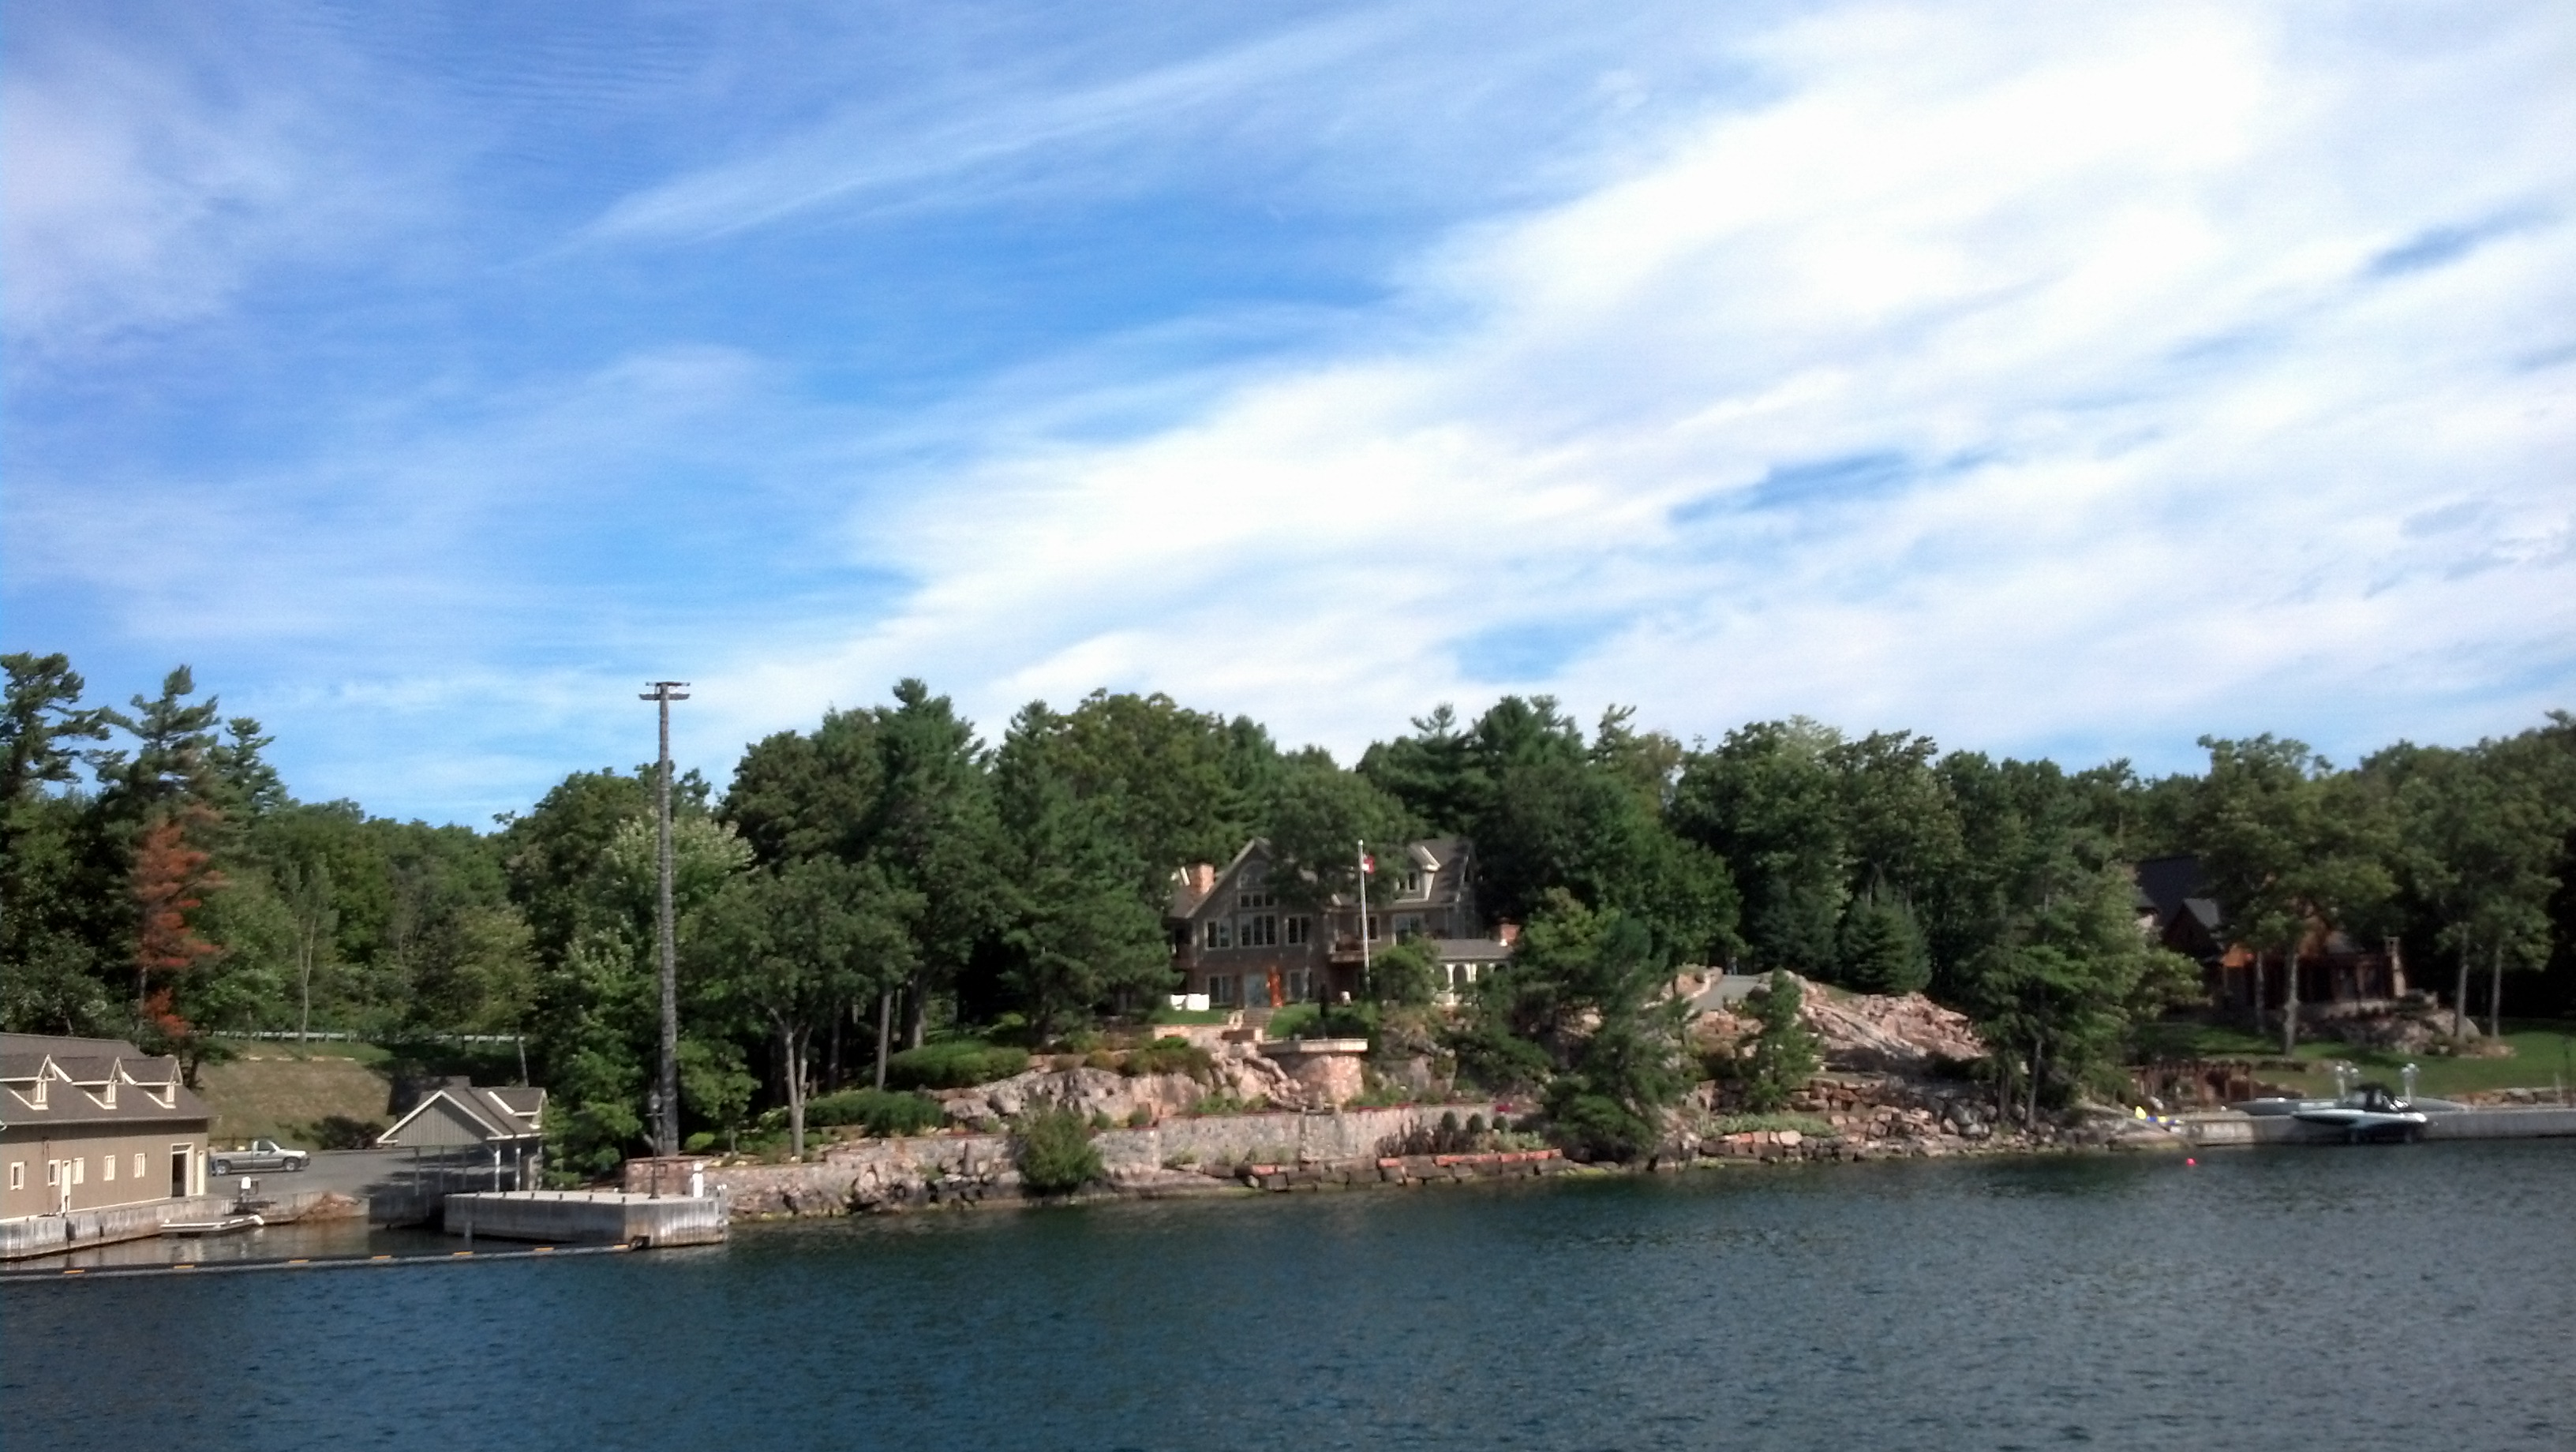 If You Like Being on the Water, Then You’ll Love Touring the Thousand Islands